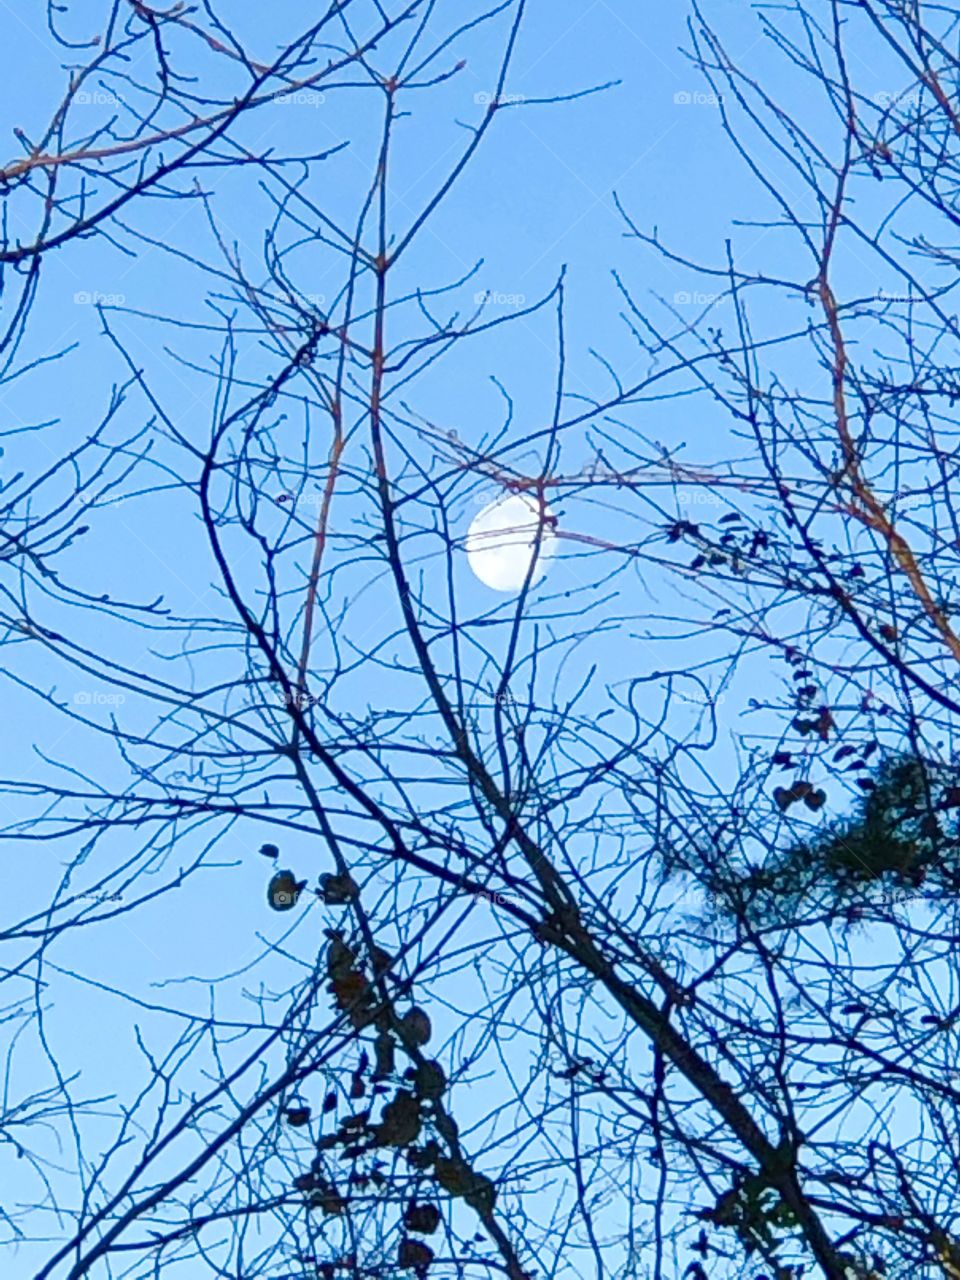 The bright moon shining through tree branches on an early dawn spring morning.